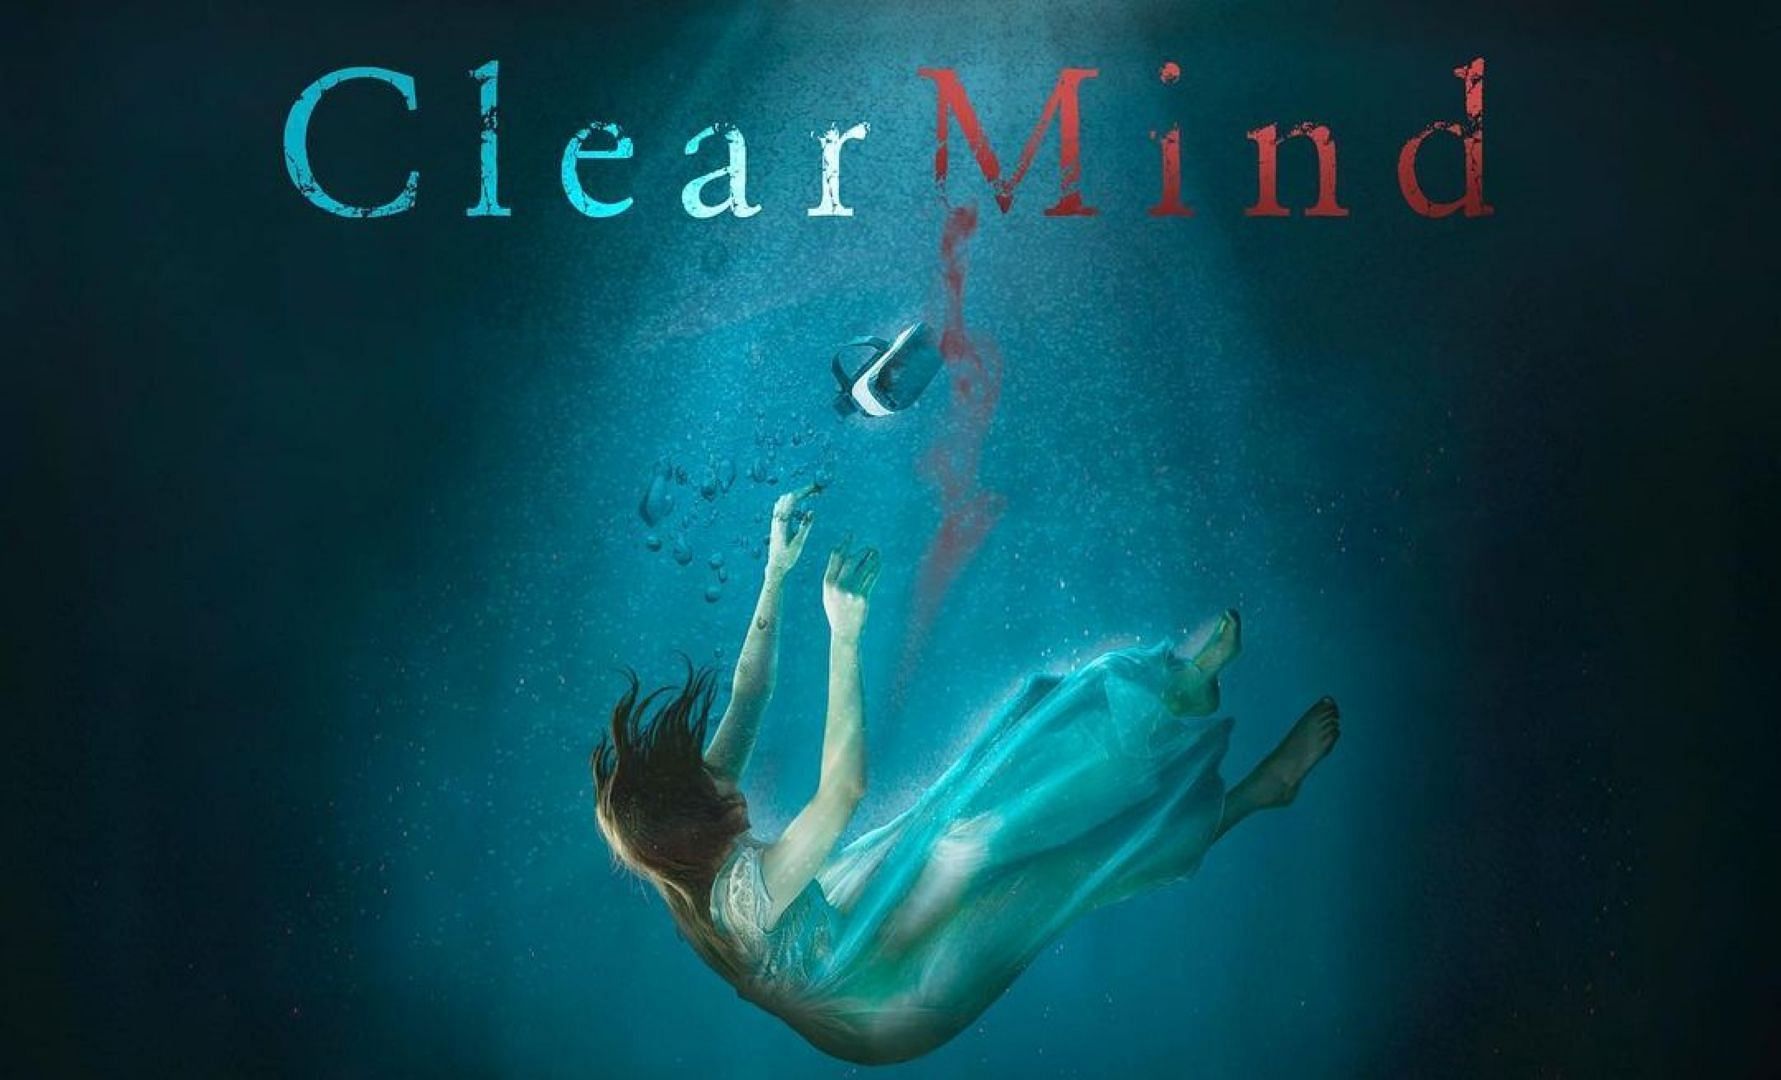 ClearMind is available on Amazon Prime and Tubi (Image via Instagram)